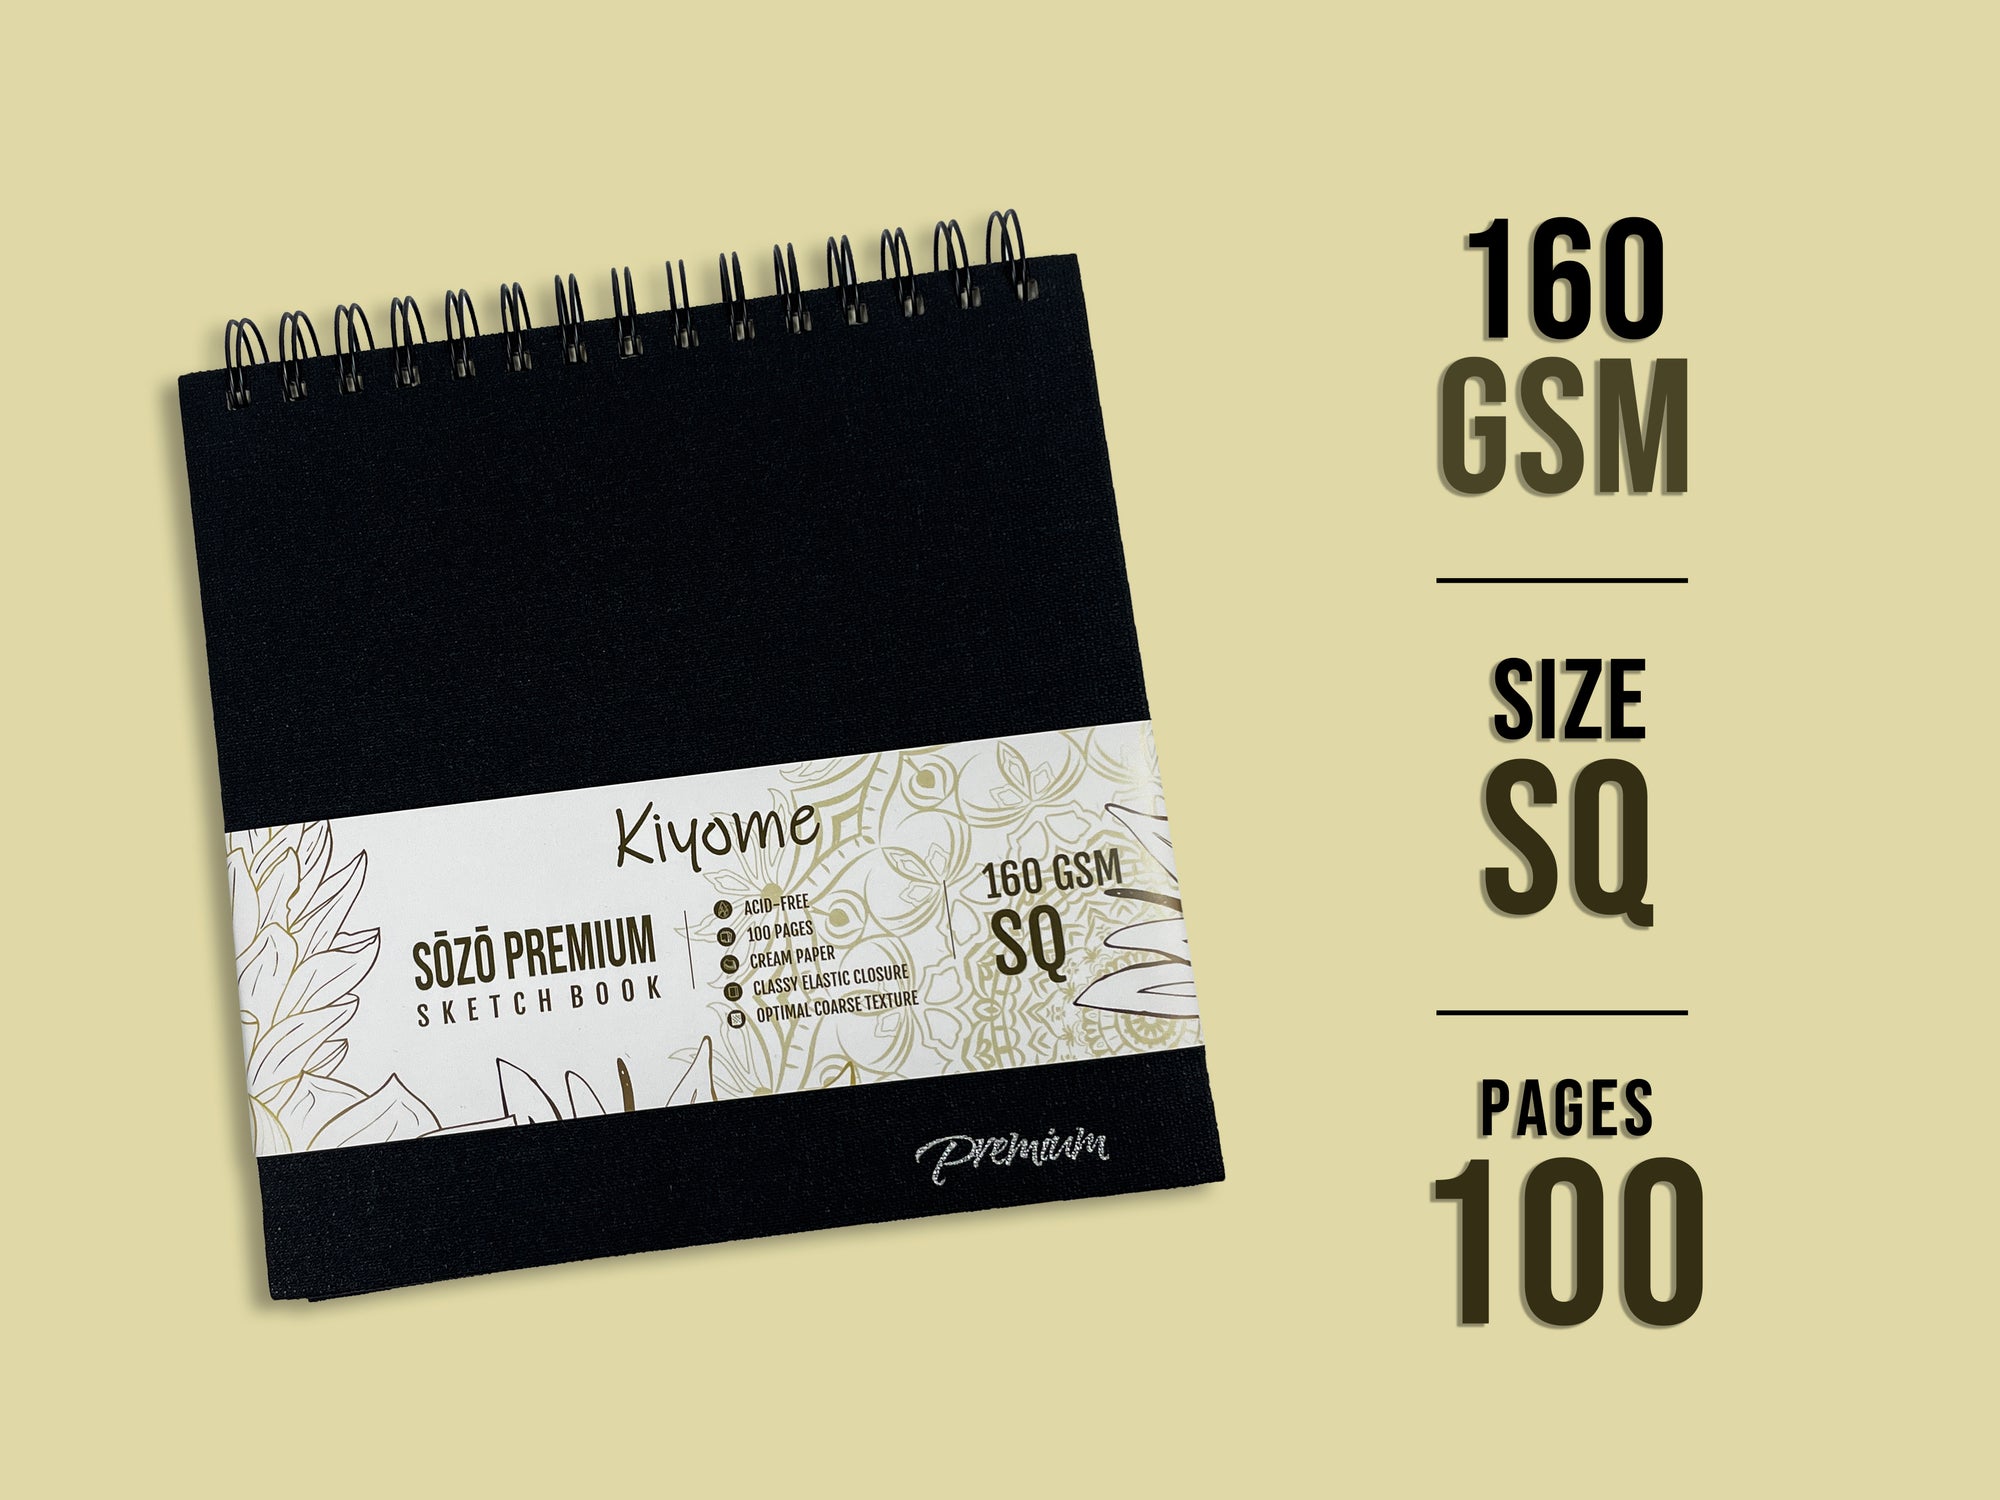 Kiyome SOZO Premium Sketchbook | 160 GSM |  5.5X8.5 Inches | Wire-O Bound | 100 Sheets